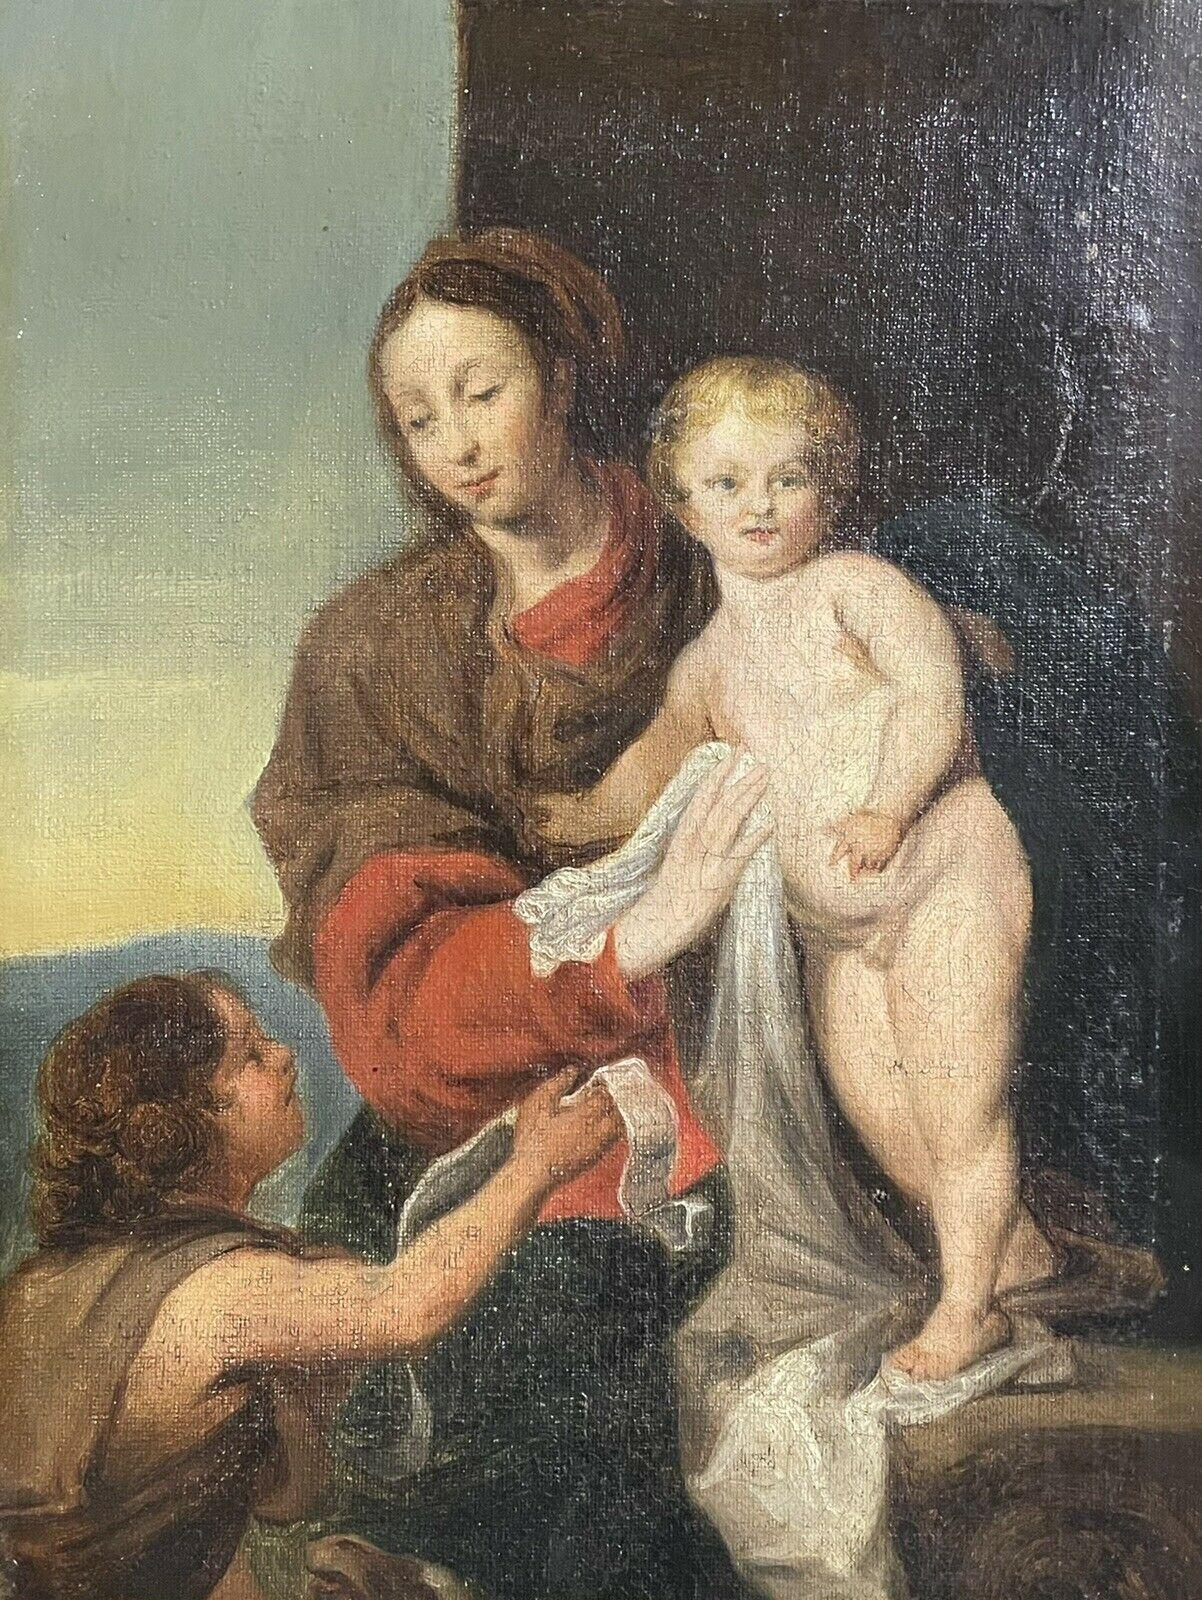 Unknown Portrait Painting - FINE 18th CENTURY FRENCH OLD MASTER OIL PAINTING - THE MADONNA & CHILD, ST. JOHN